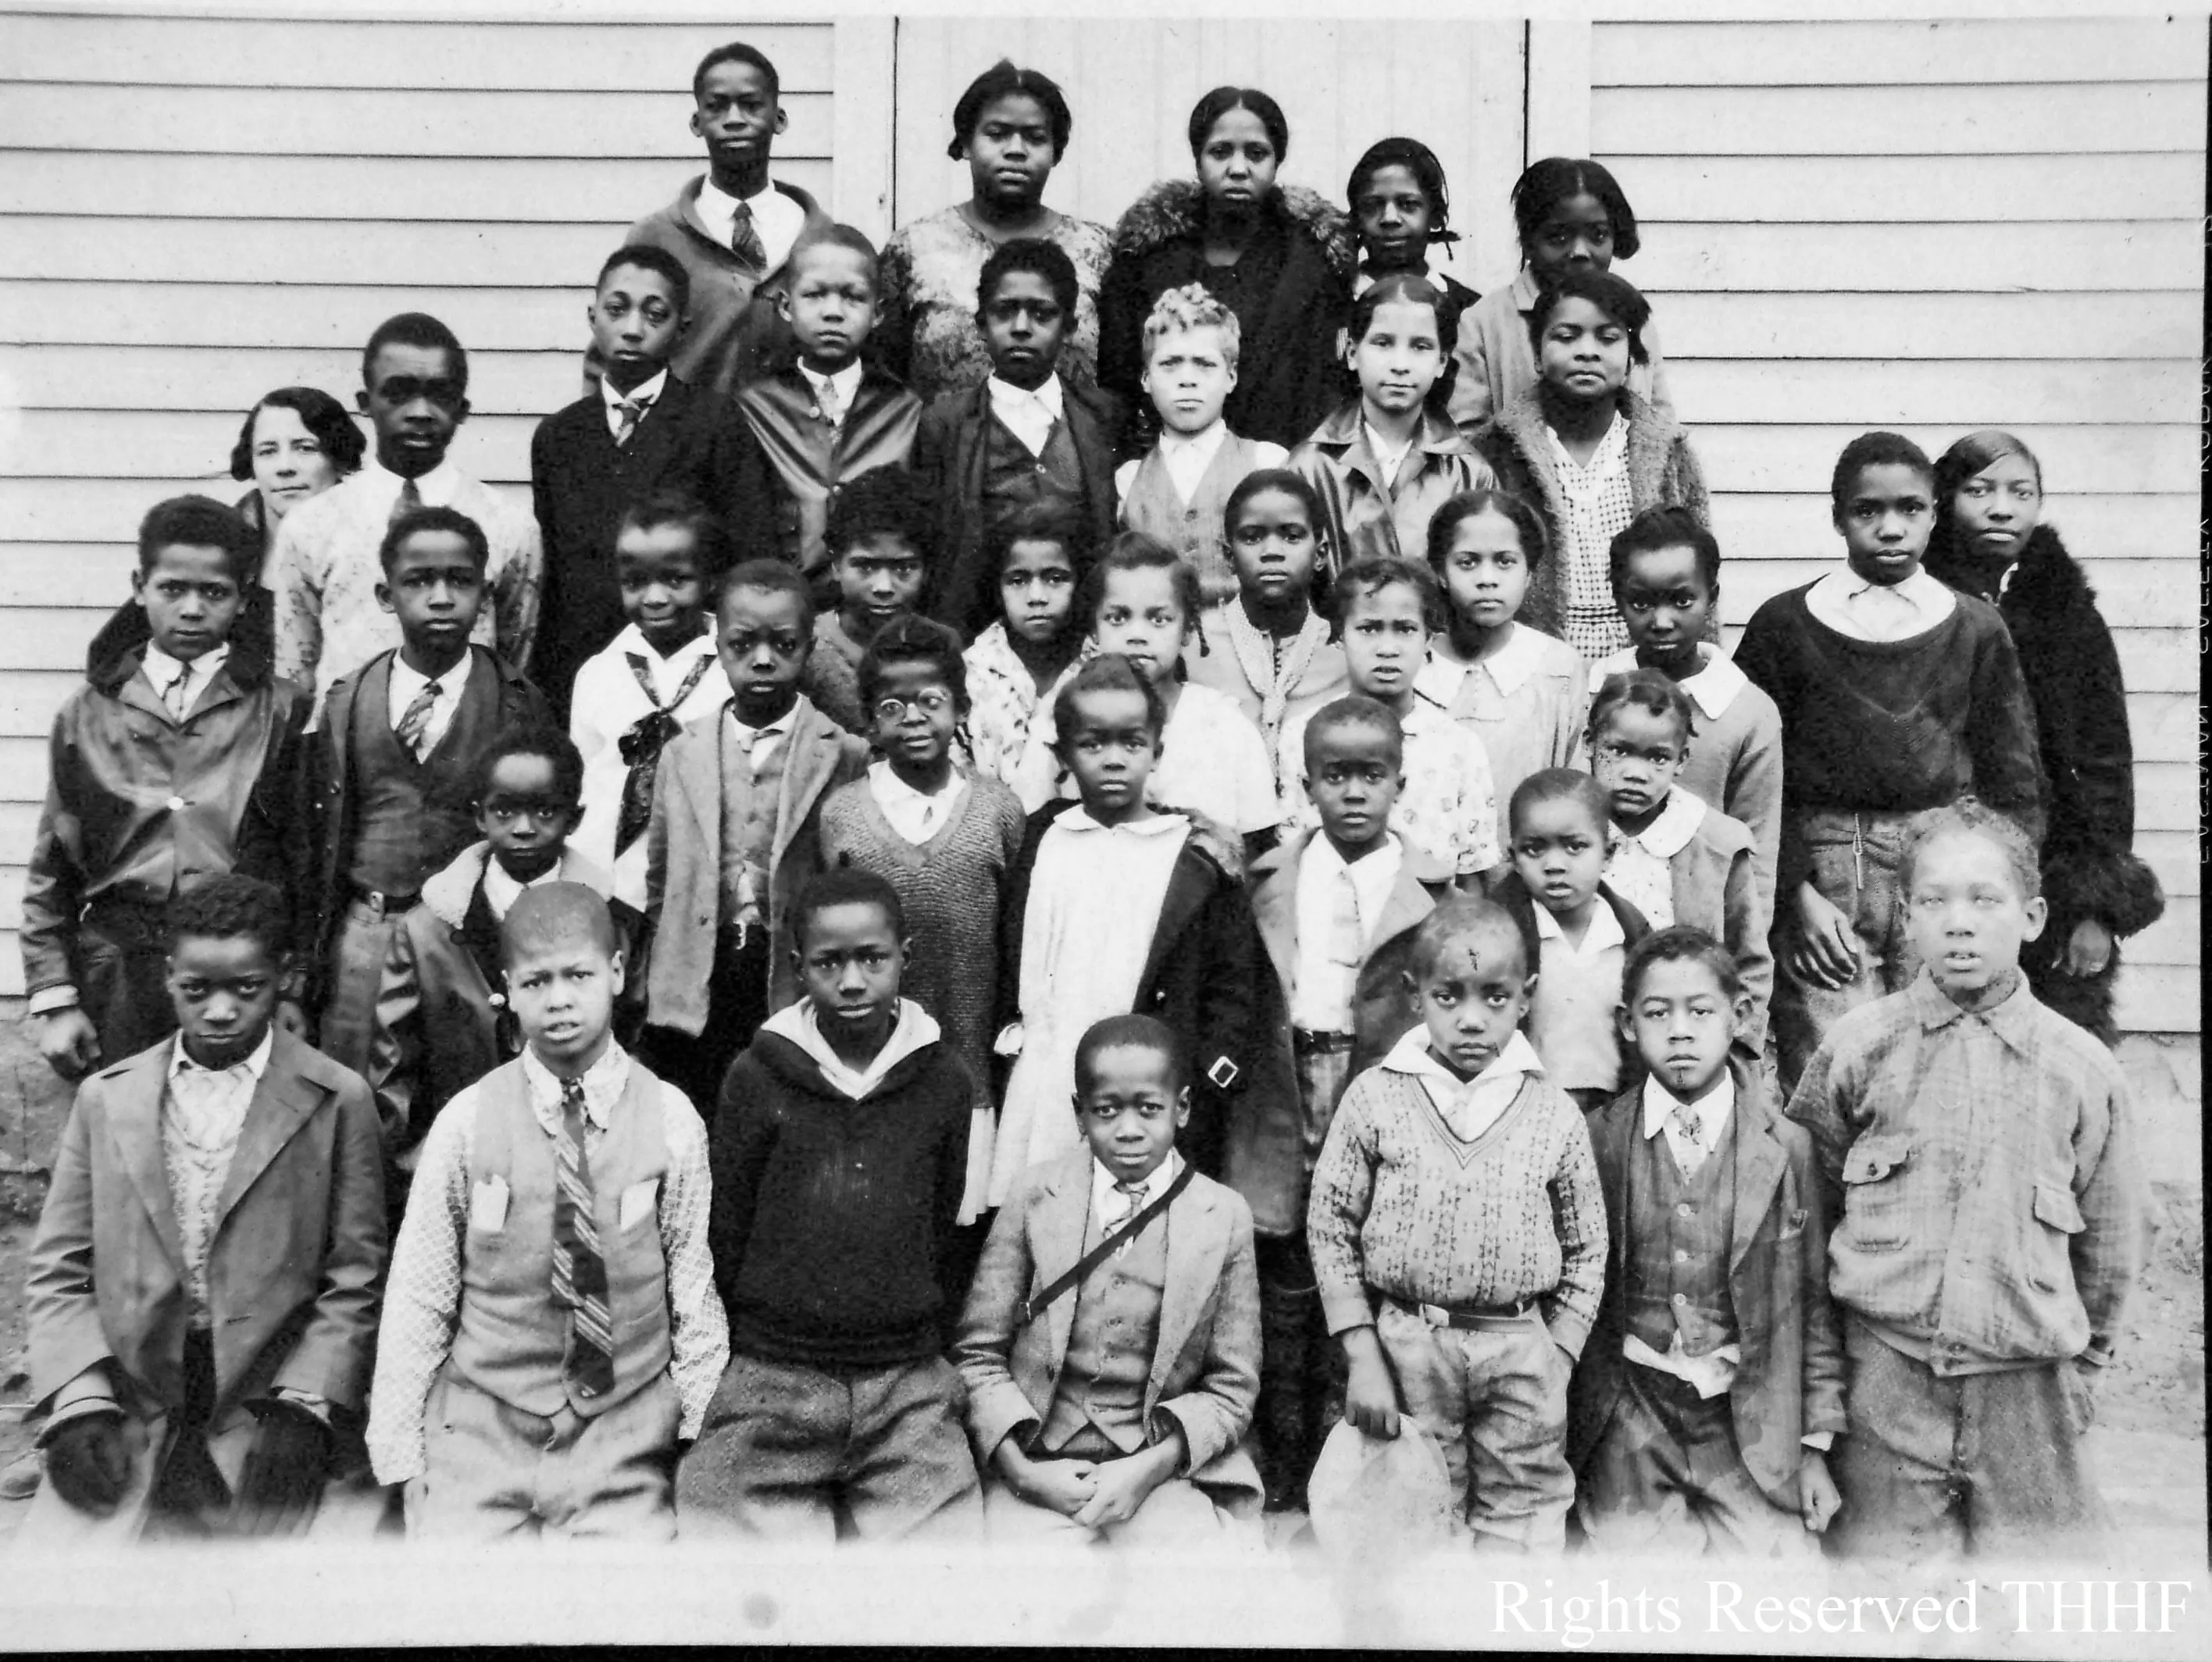 Mary Ellen Henderson and her students in front of the James Lee Colored School